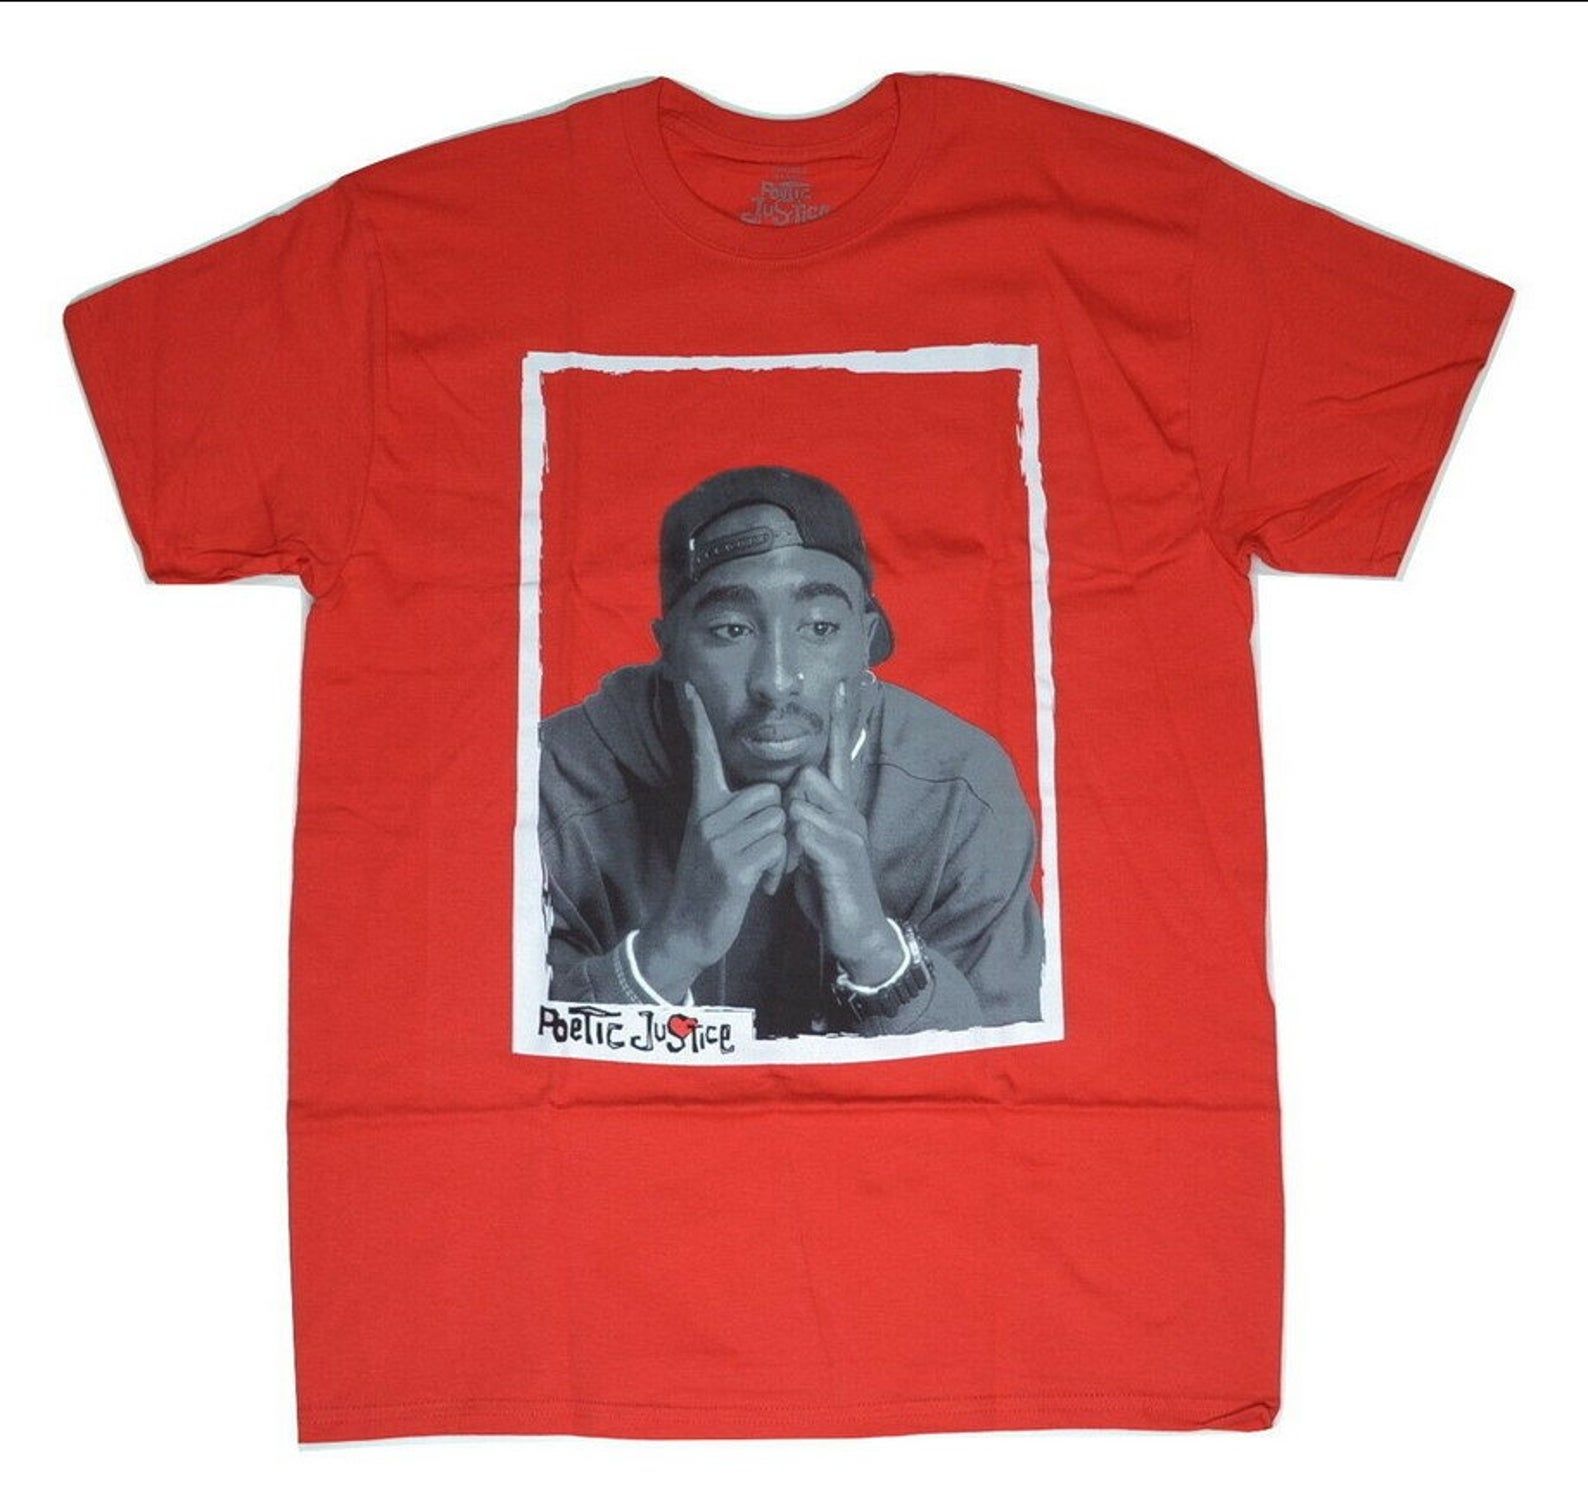 Tupac 2pac Shakur Poetic Justice All Alone T-shirt Red Rap Nwt